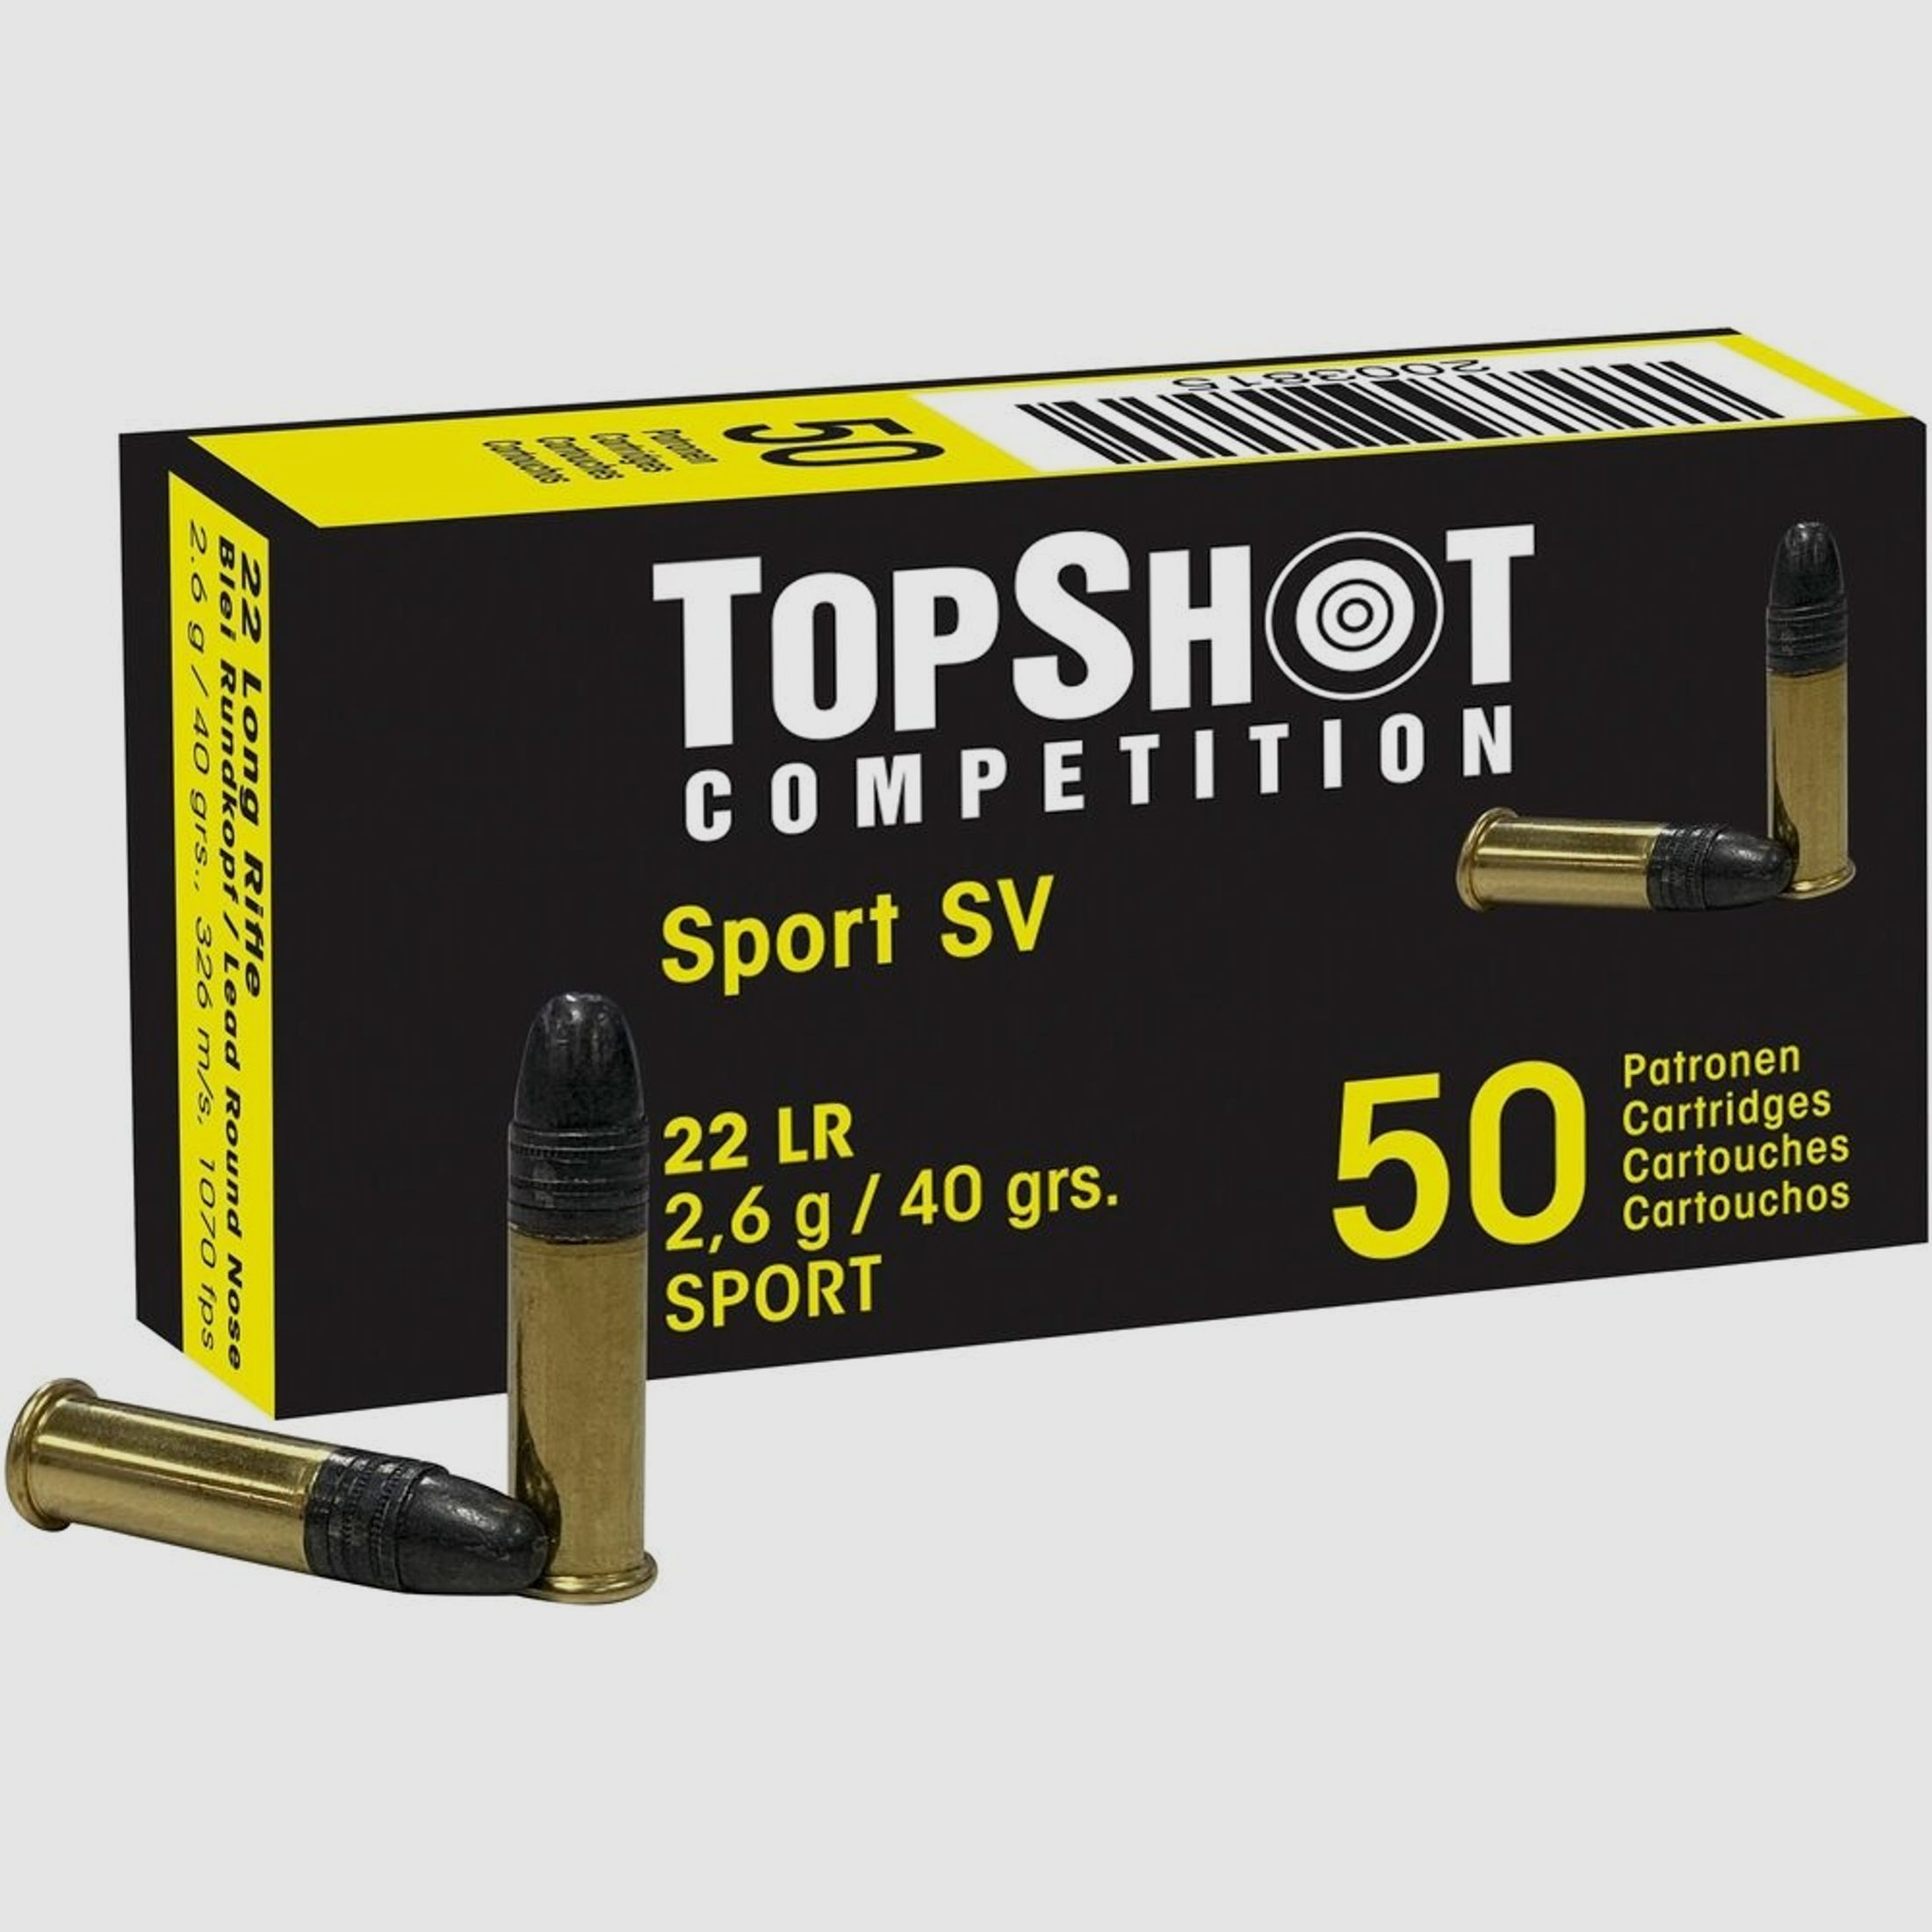 TOPSHOT Competition	 Black Edition SV 2,6g/40grs. .22 lfB.